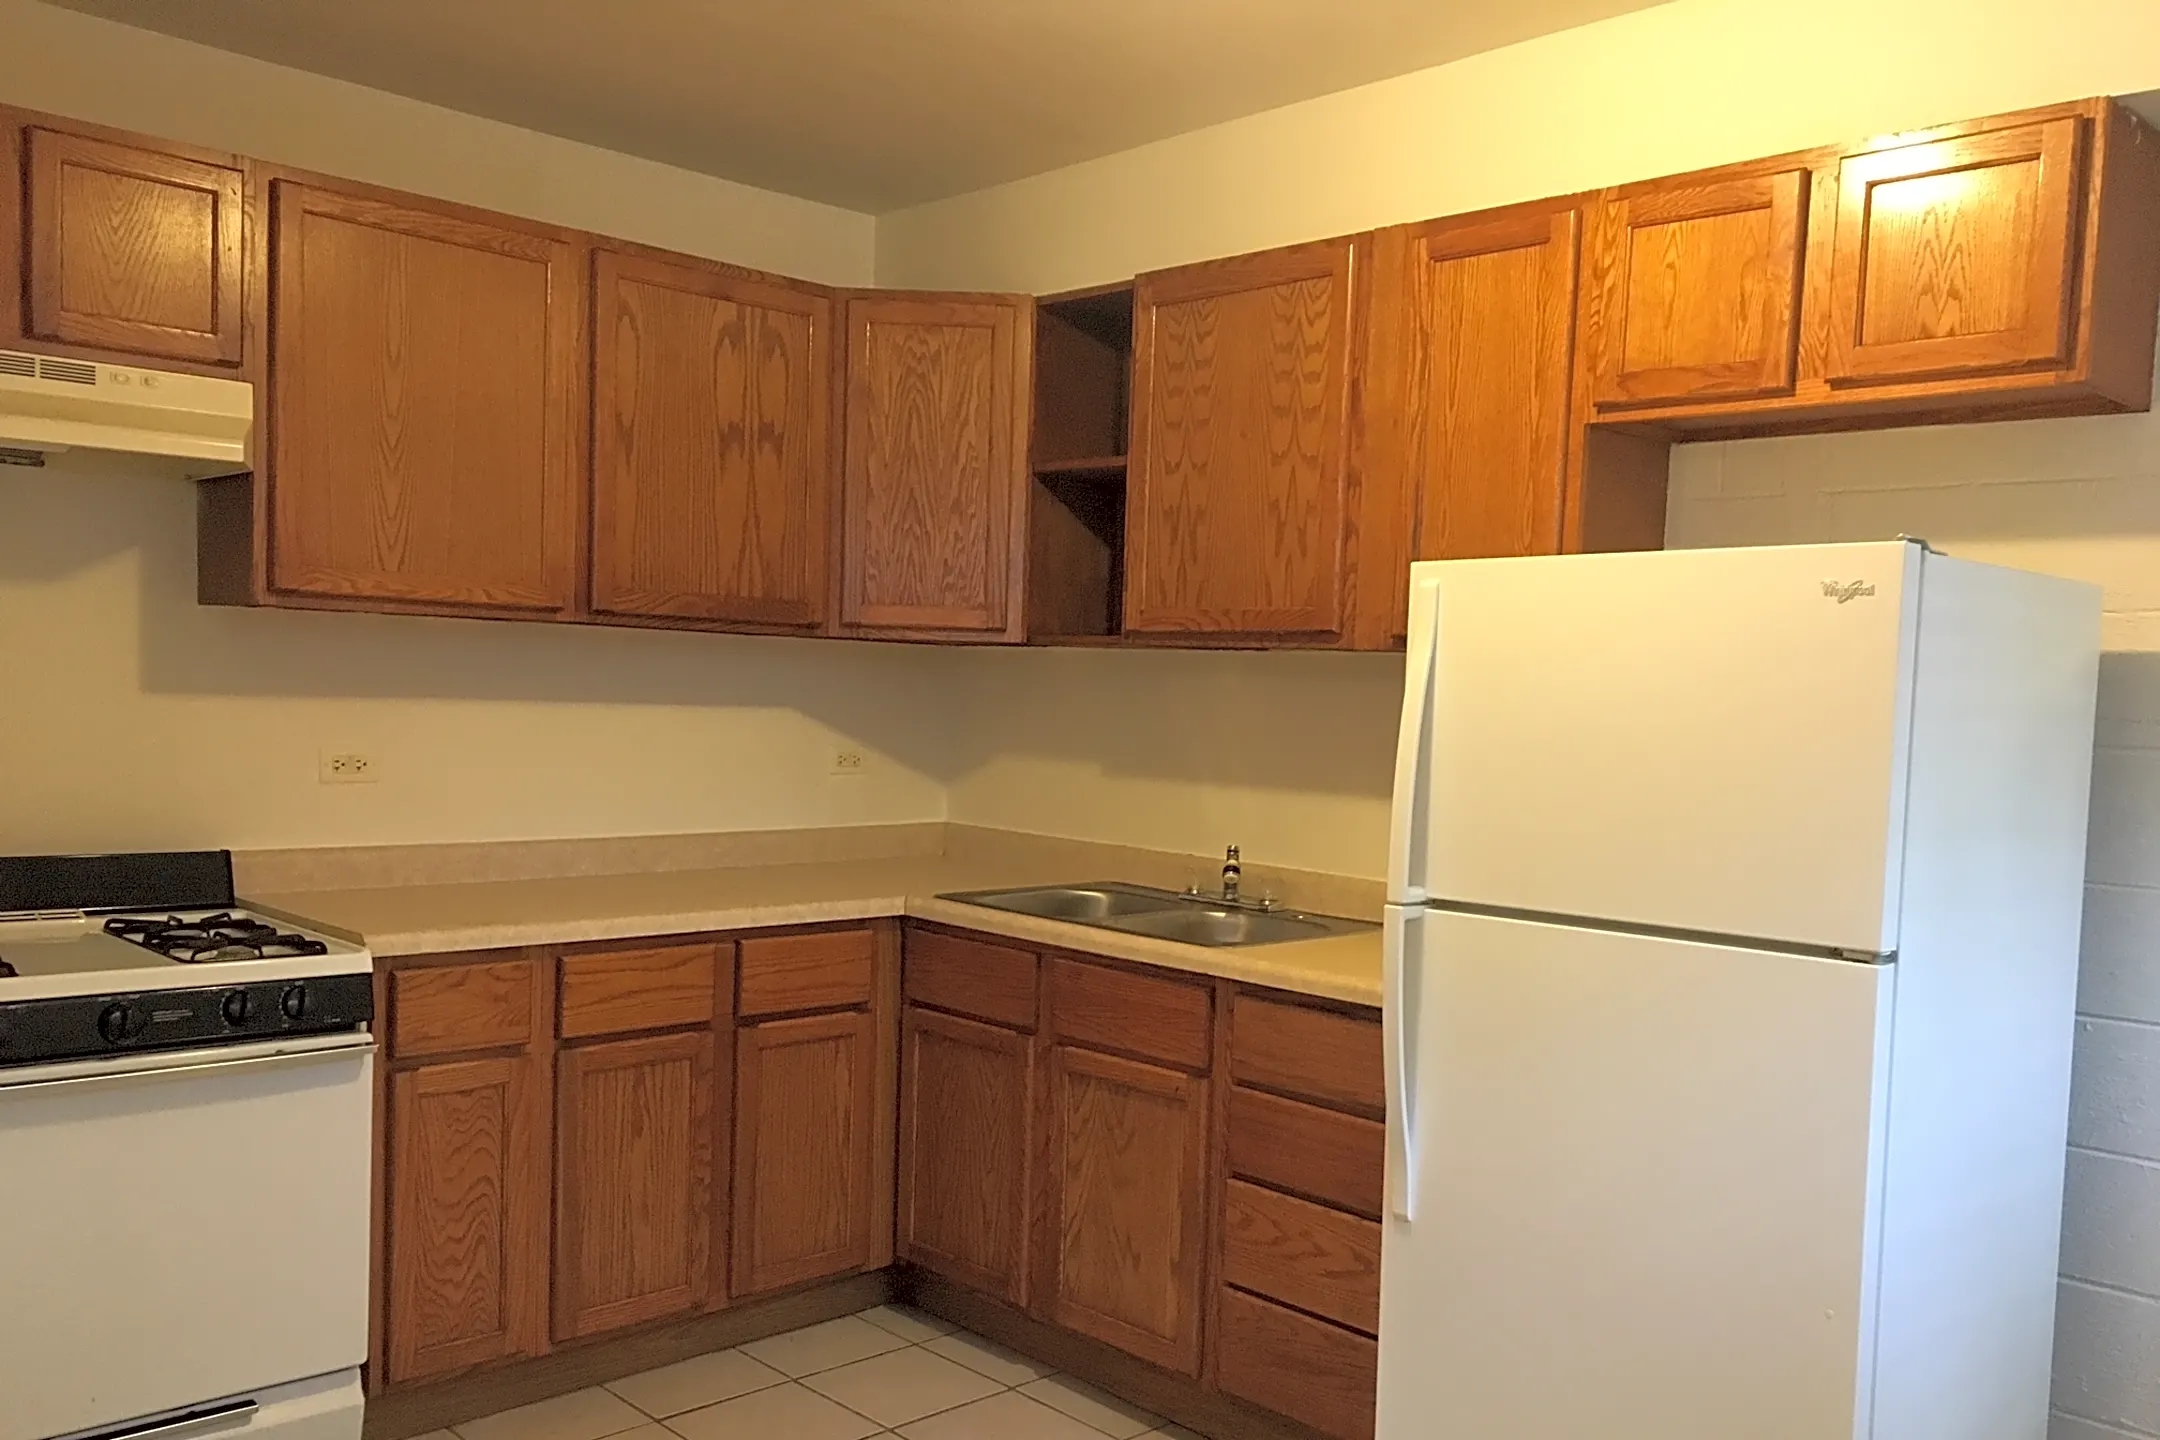 Kitchen - Marquette Apartments - Gary, IN